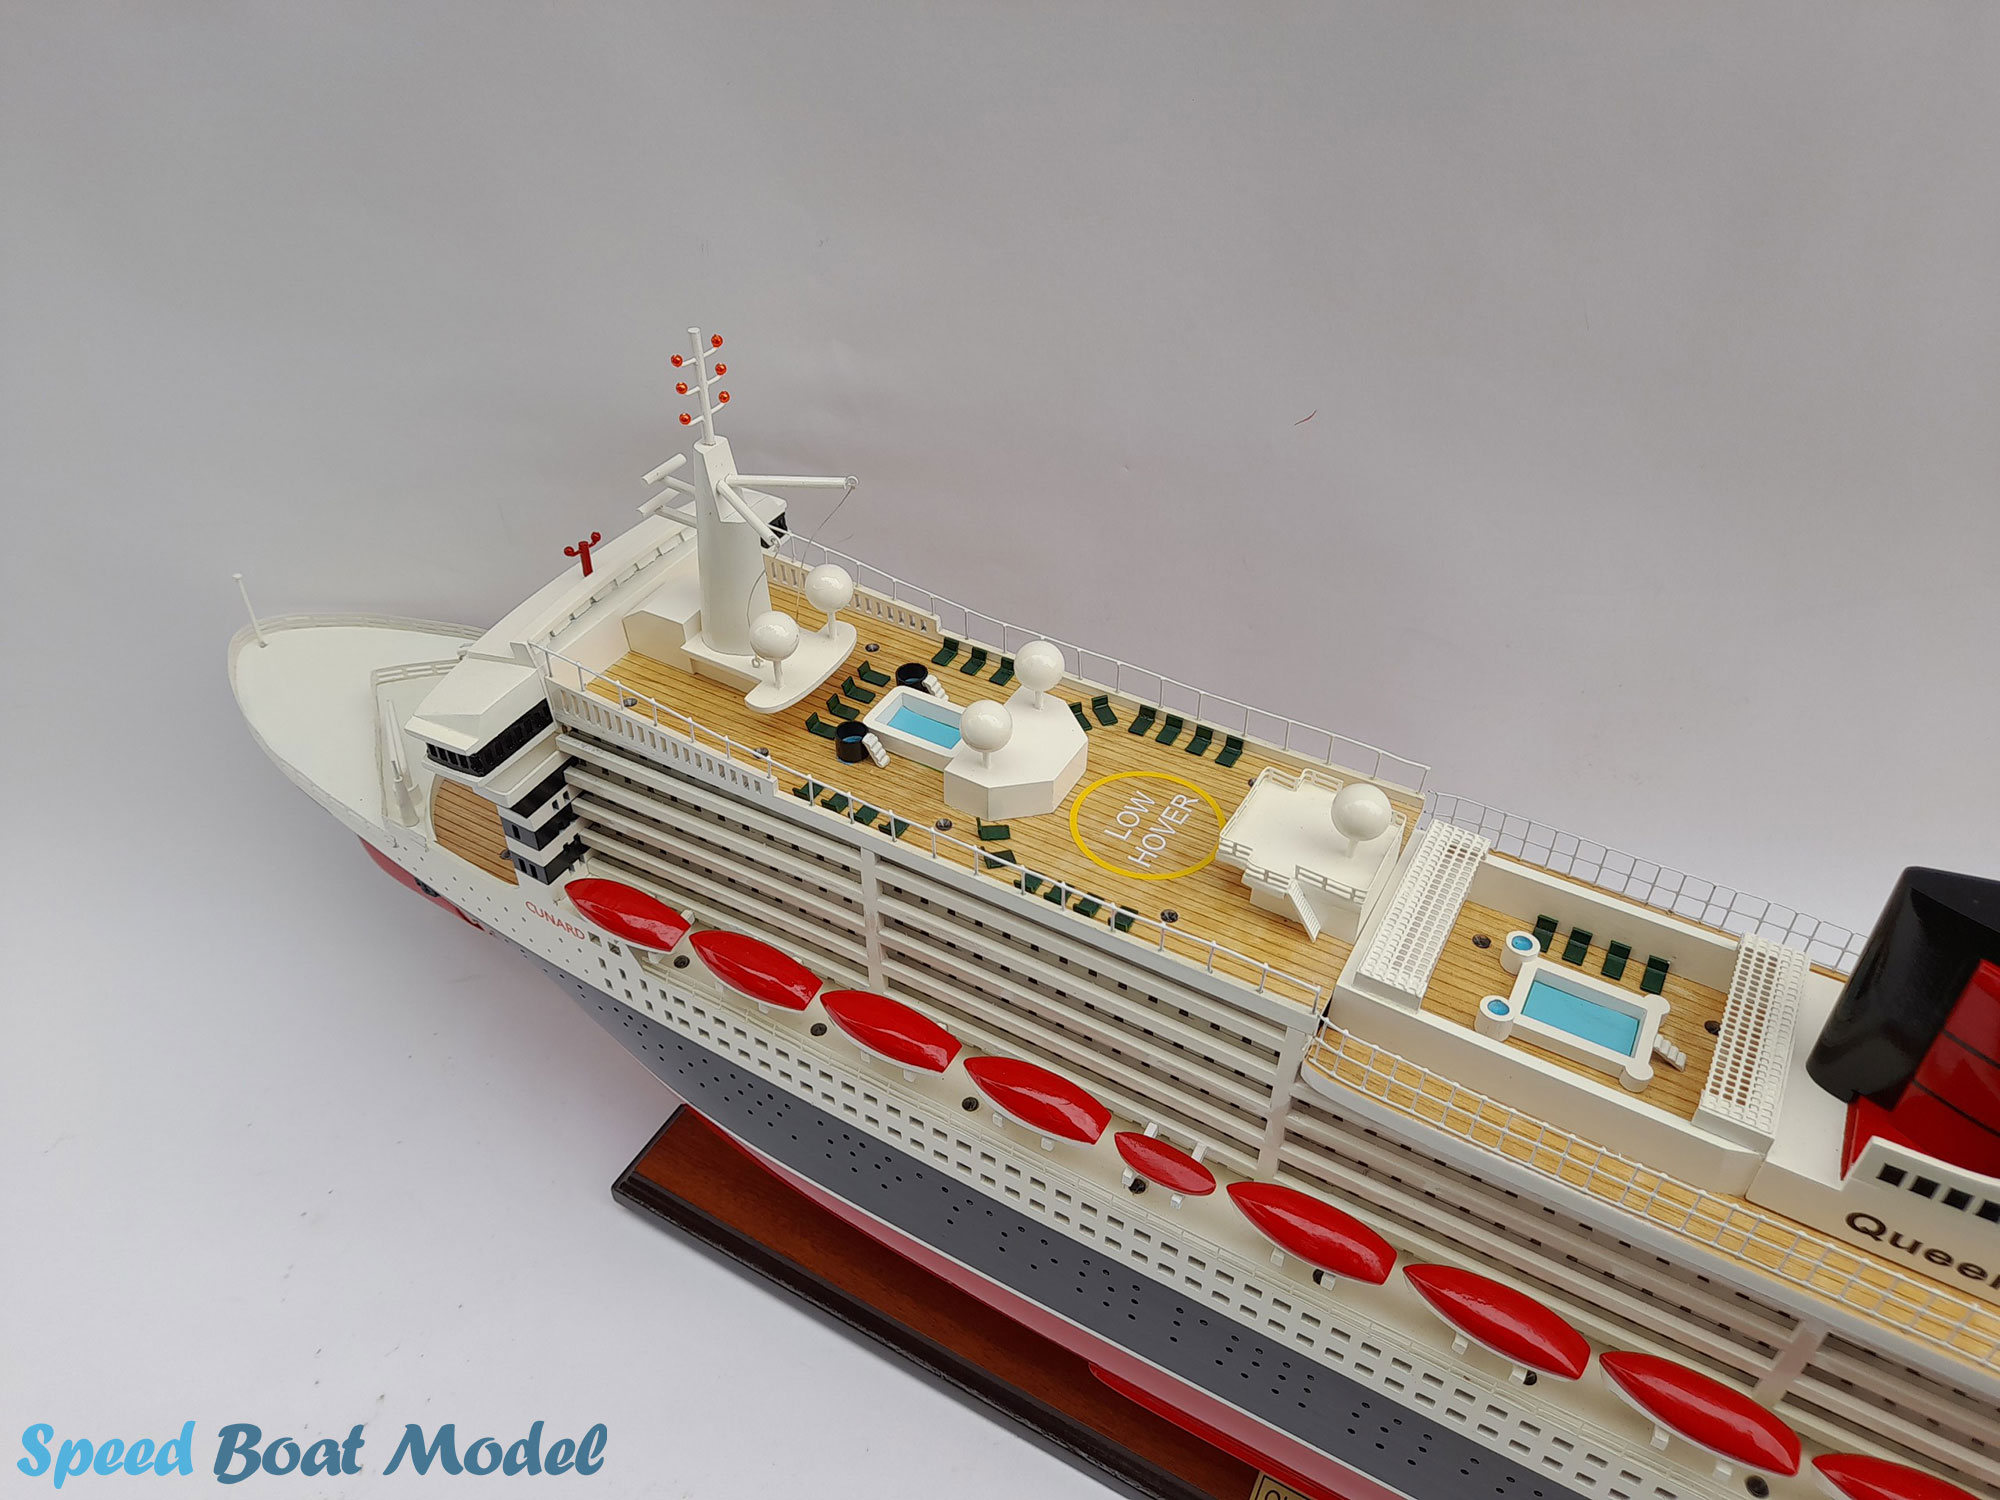 Rms Queen Mary Cruise Liner Model 39.3